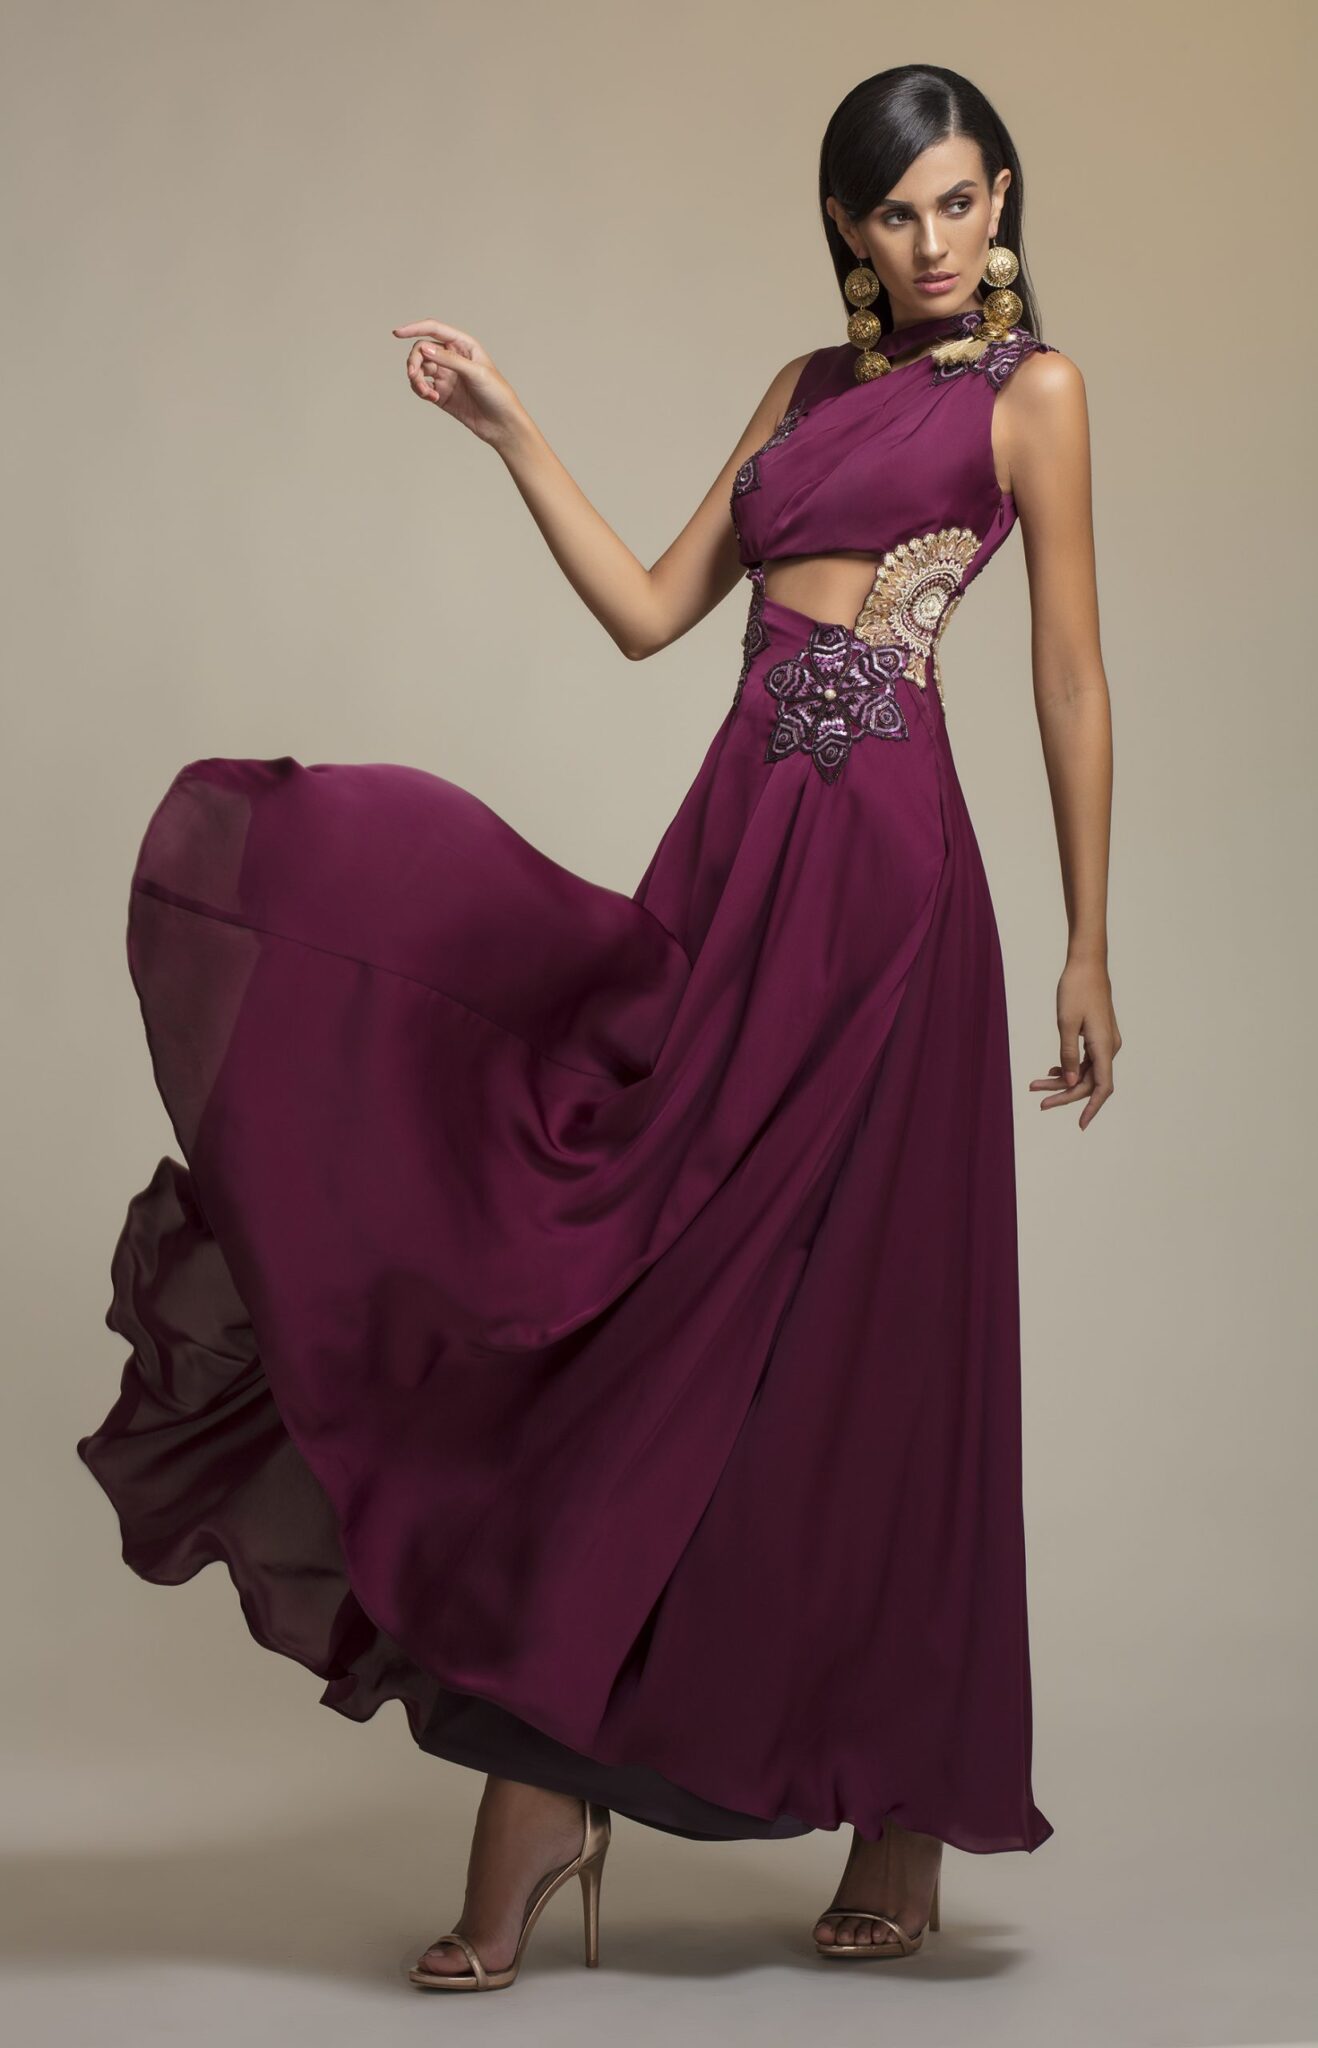 7 Best Online Stores For Party Dresses In India | So Delhi